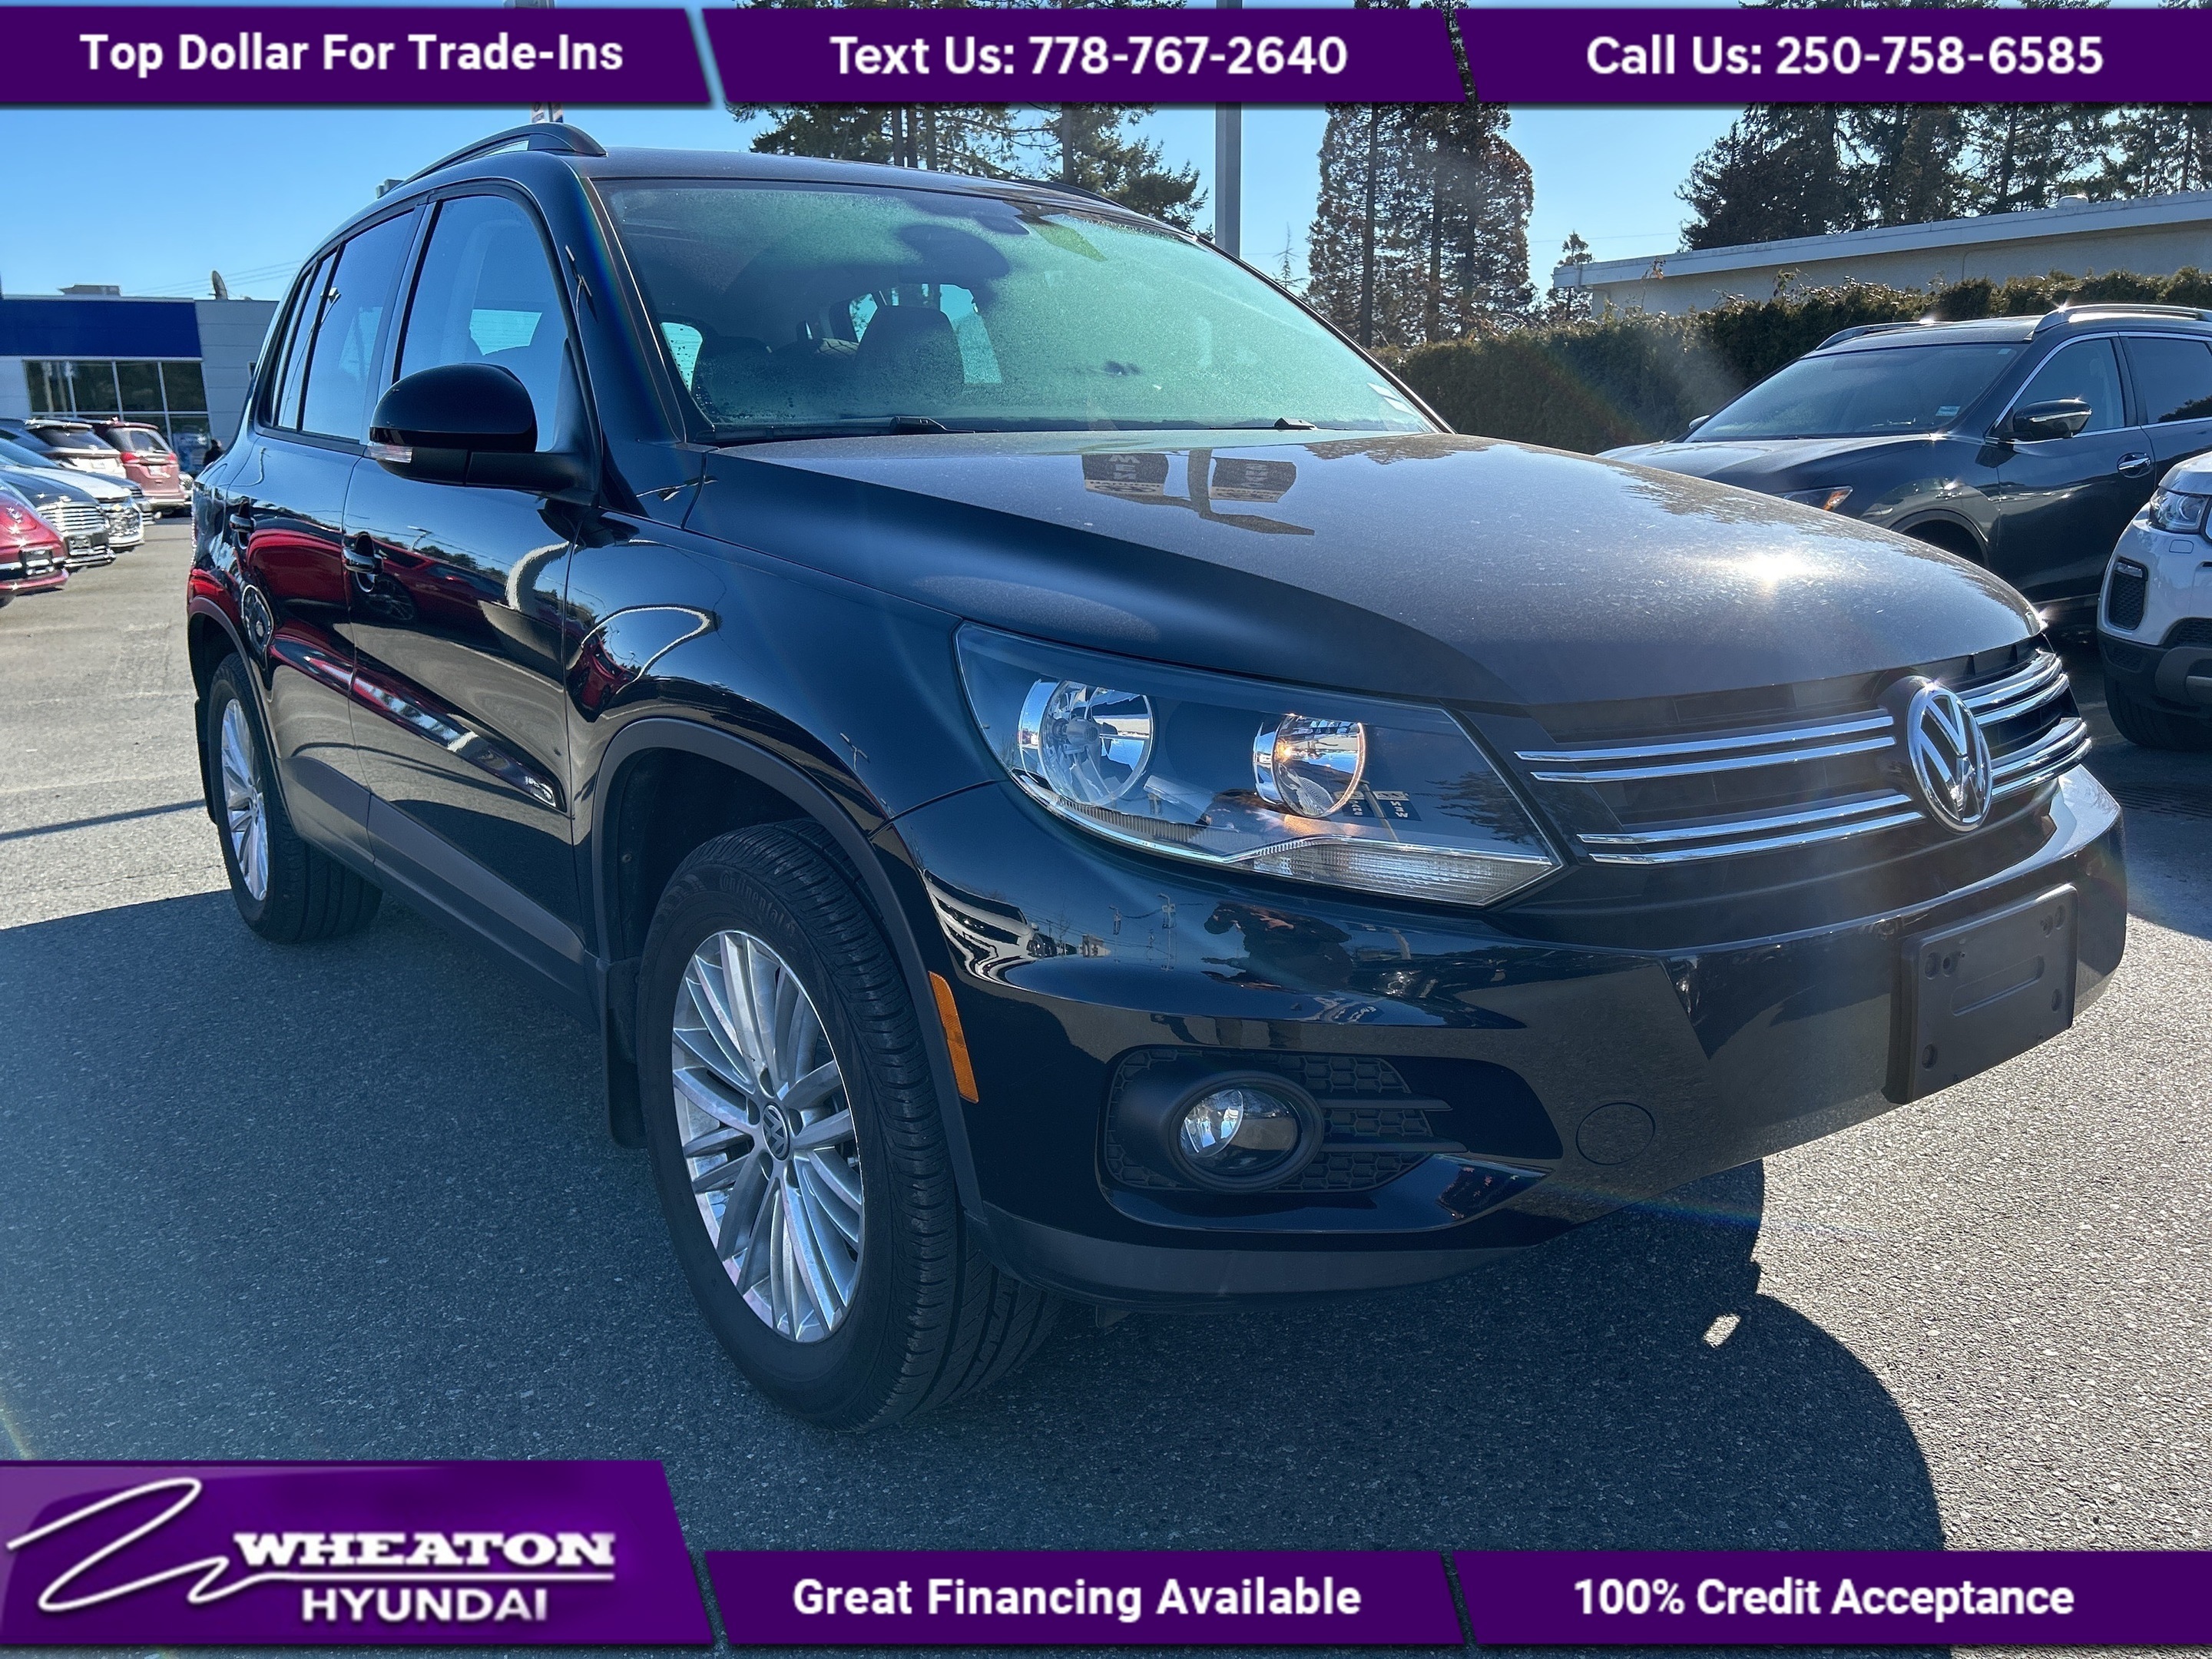 2016 Volkswagen Tiguan Special Edition, One Owner, No Accidents, Local, T